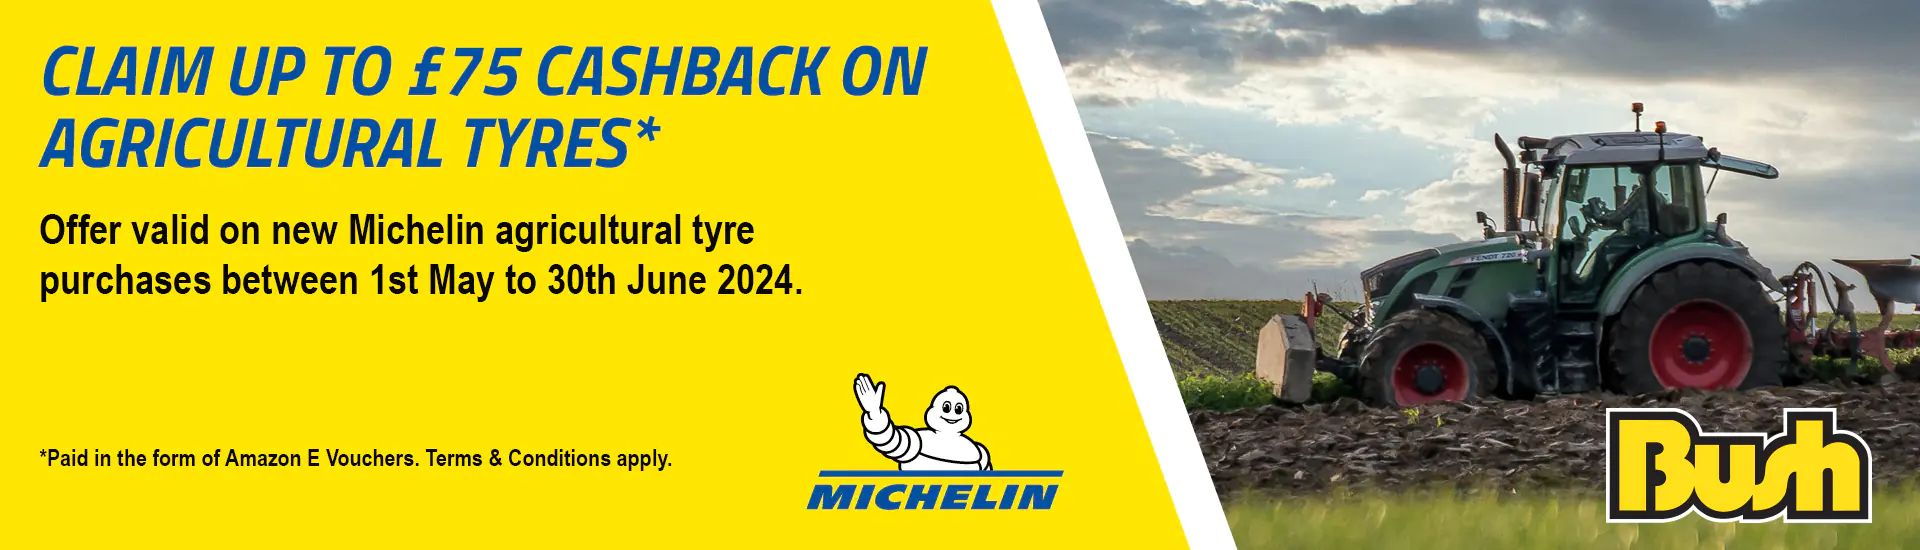 Michelin Agri Offer